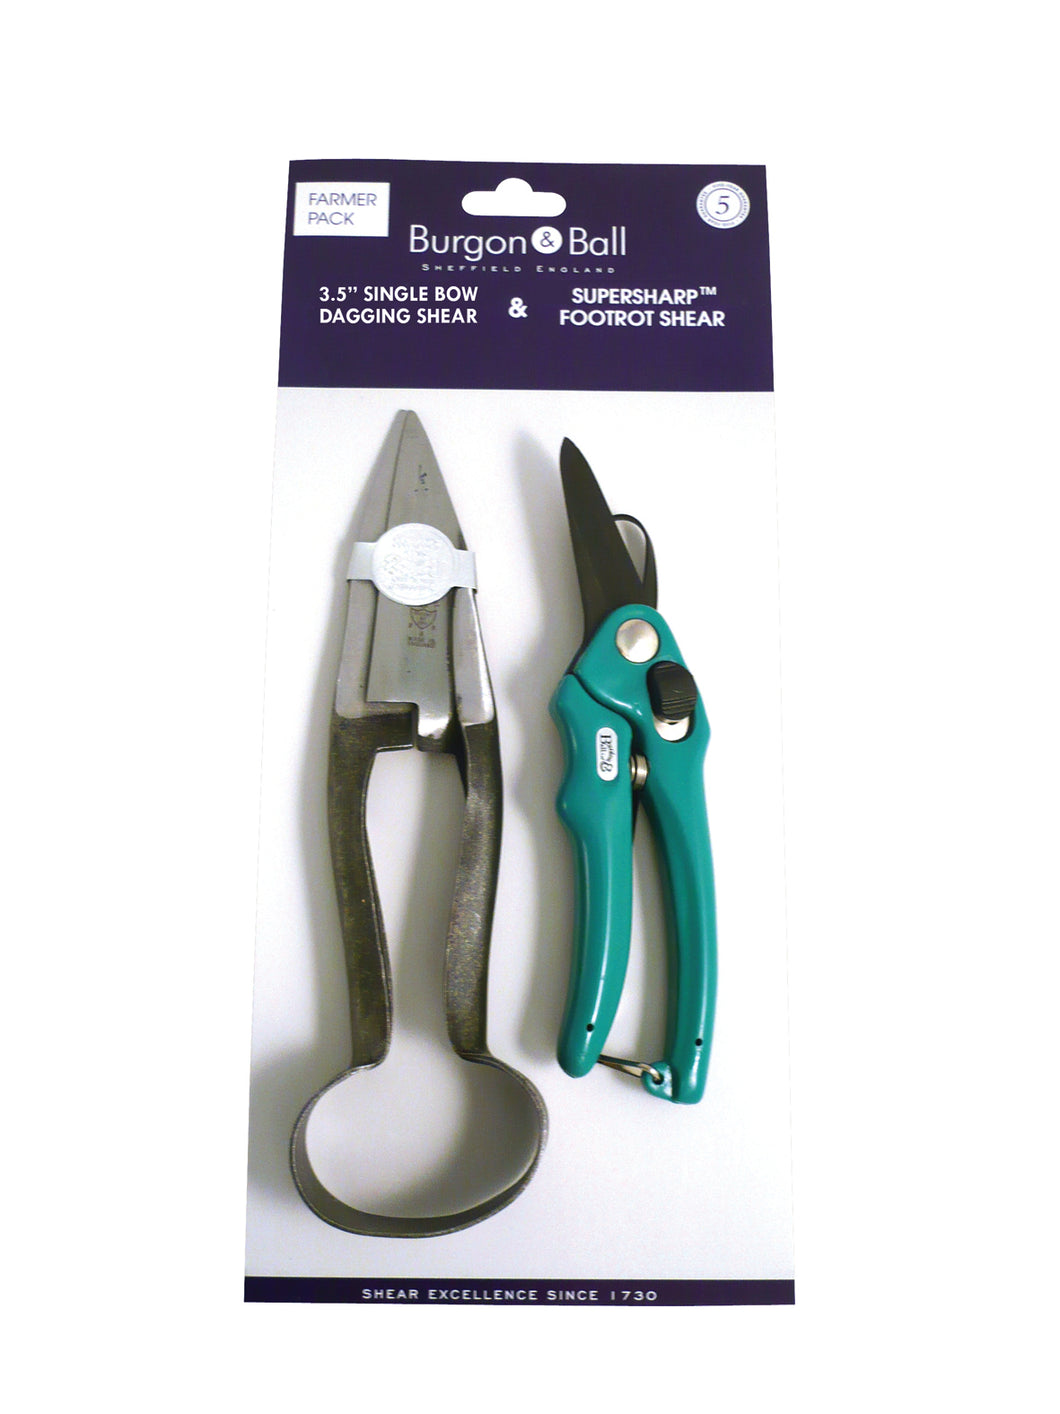 Burgon & Ball dagging shears and footrot shears - Sheepproducts.ie